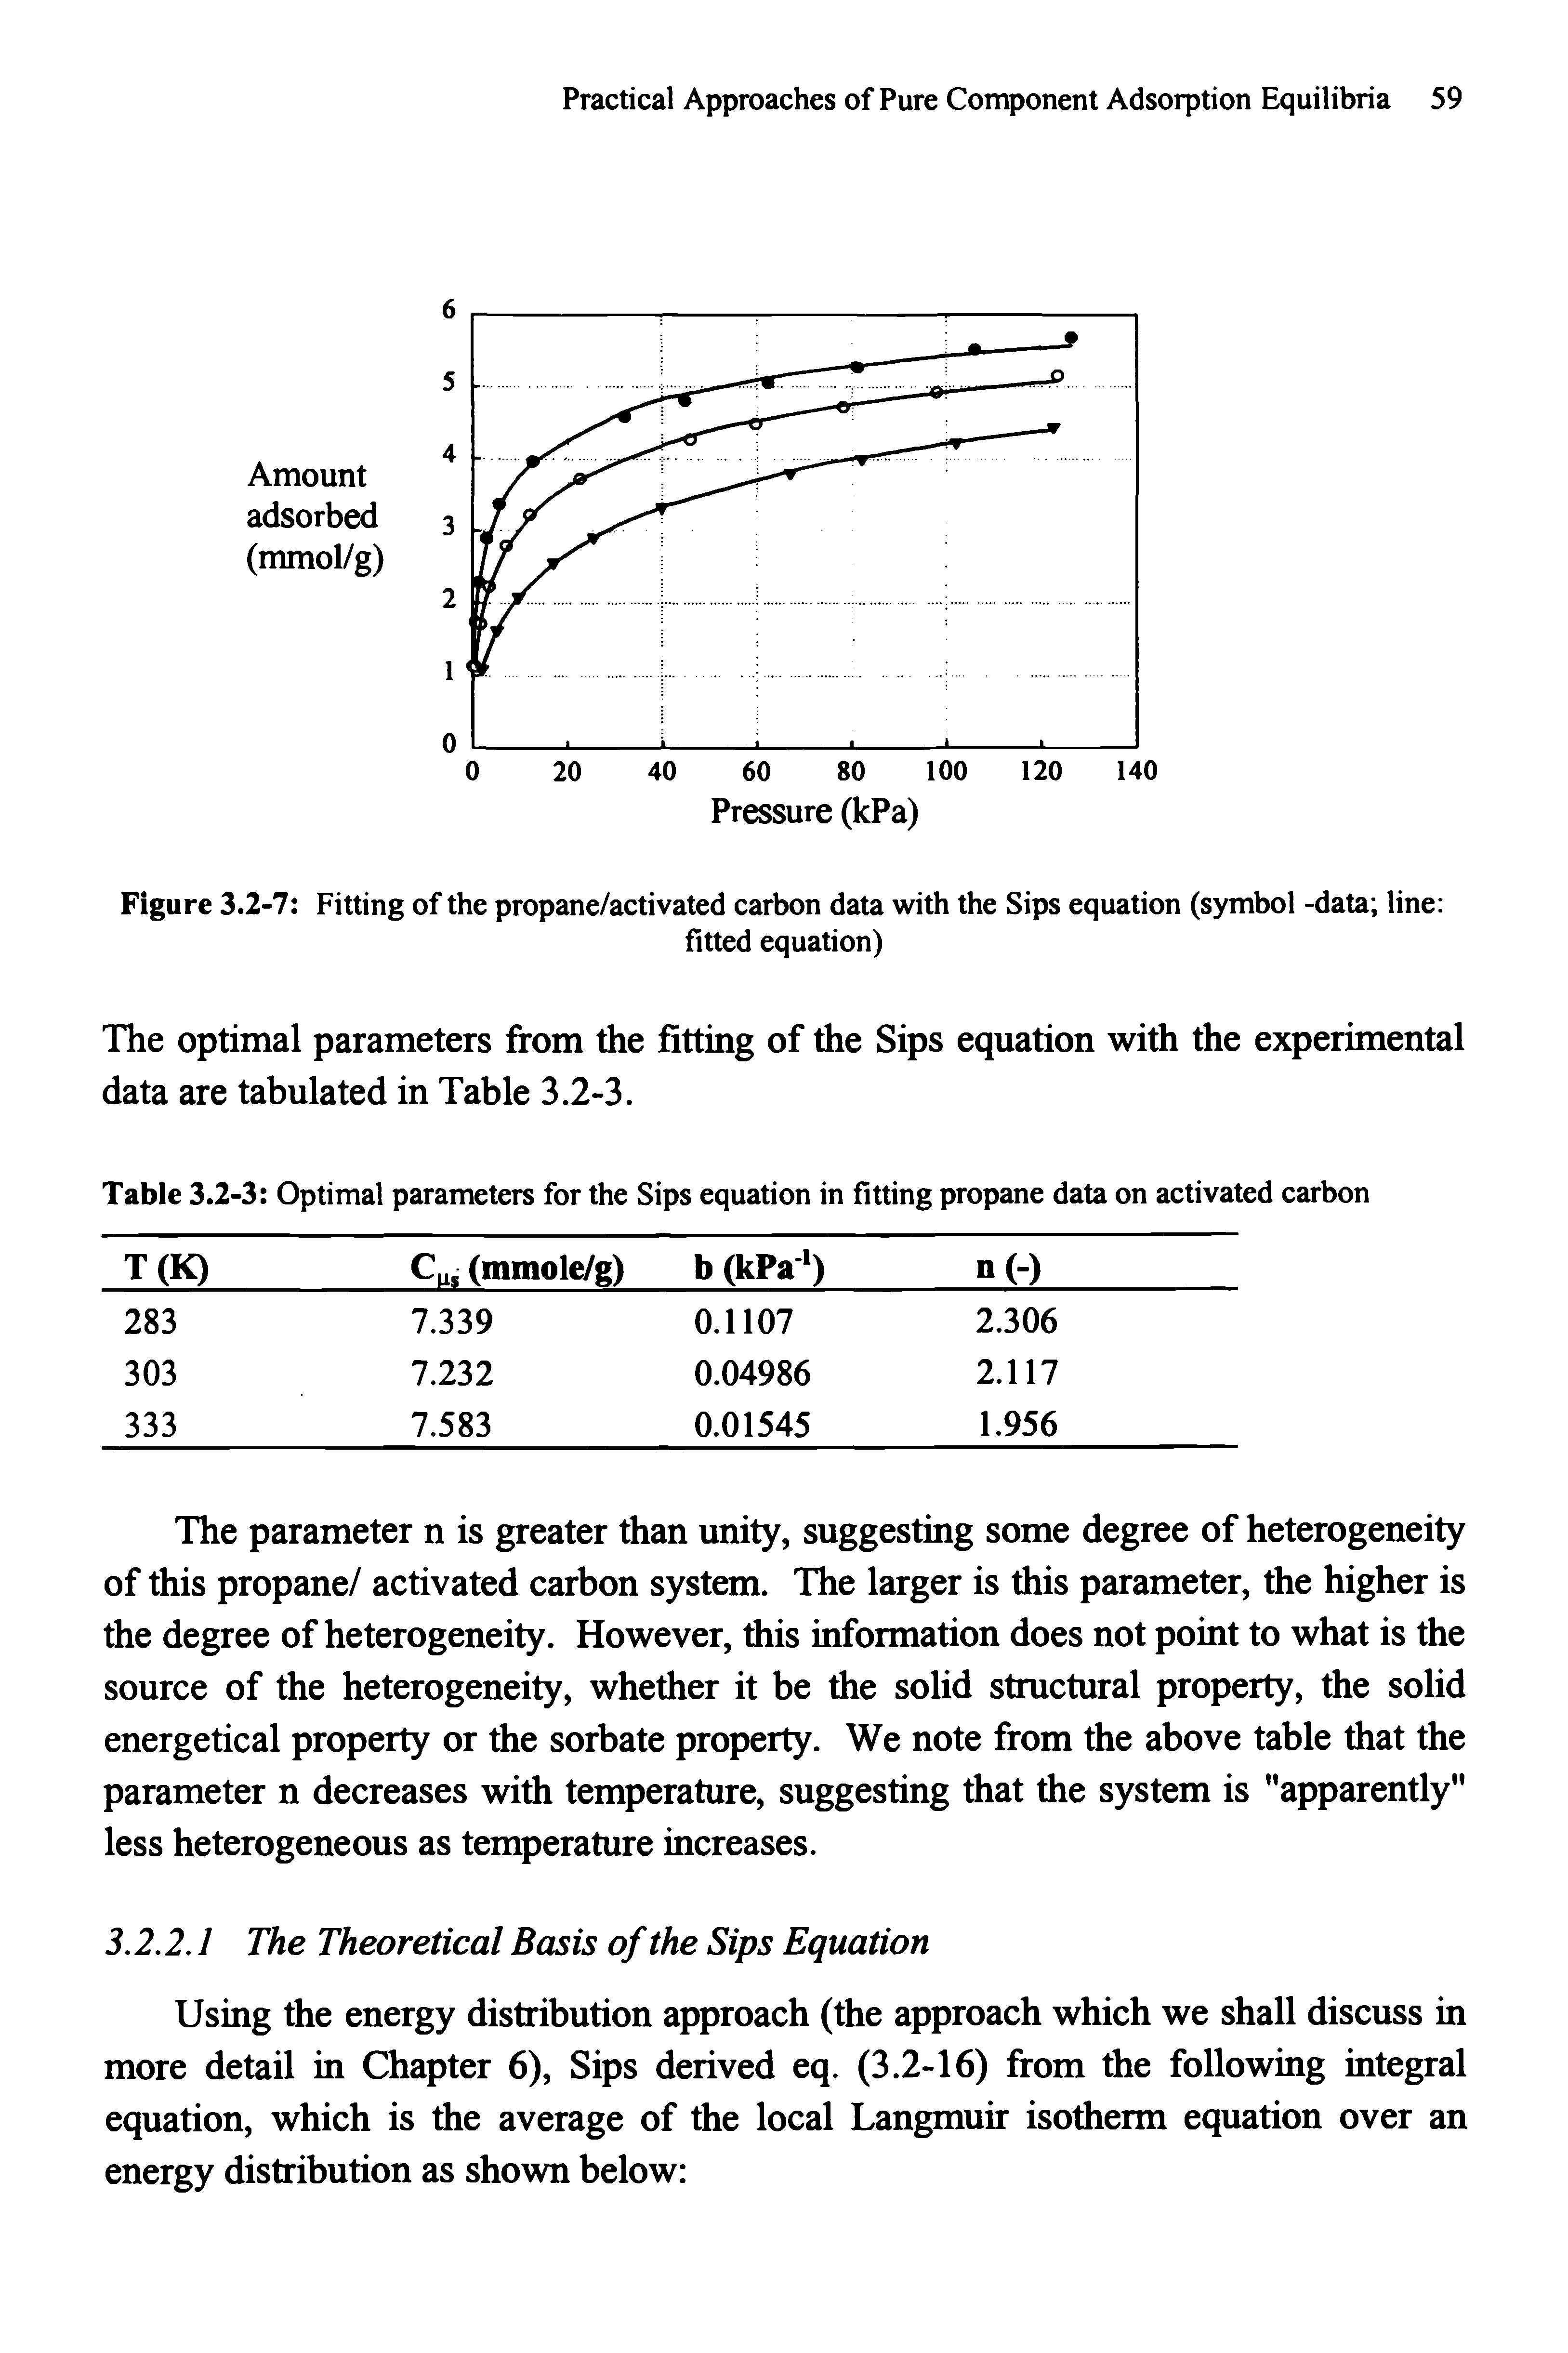 Table 3.2-3 Optimal parameters for the Sips equation in fitting propane data on activated carbon...